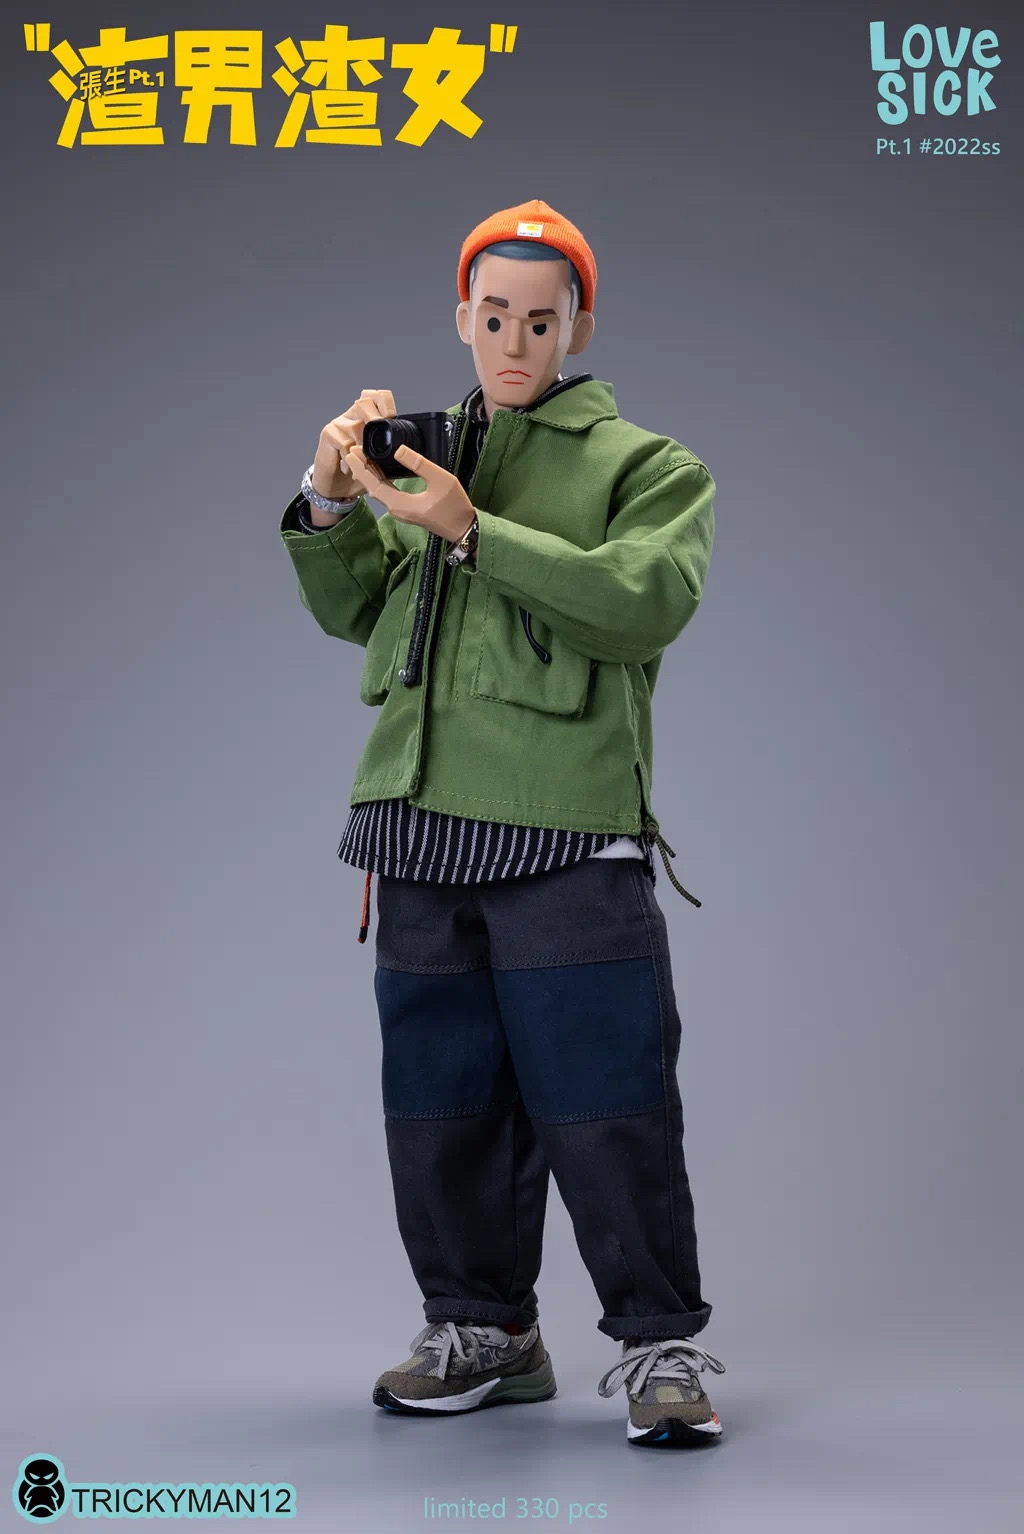 NEW PRODUCT: Trickyman12: 1/6 "Scumbag" Pt.1 Zhang Sheng 2022ss Action Figure 20292711